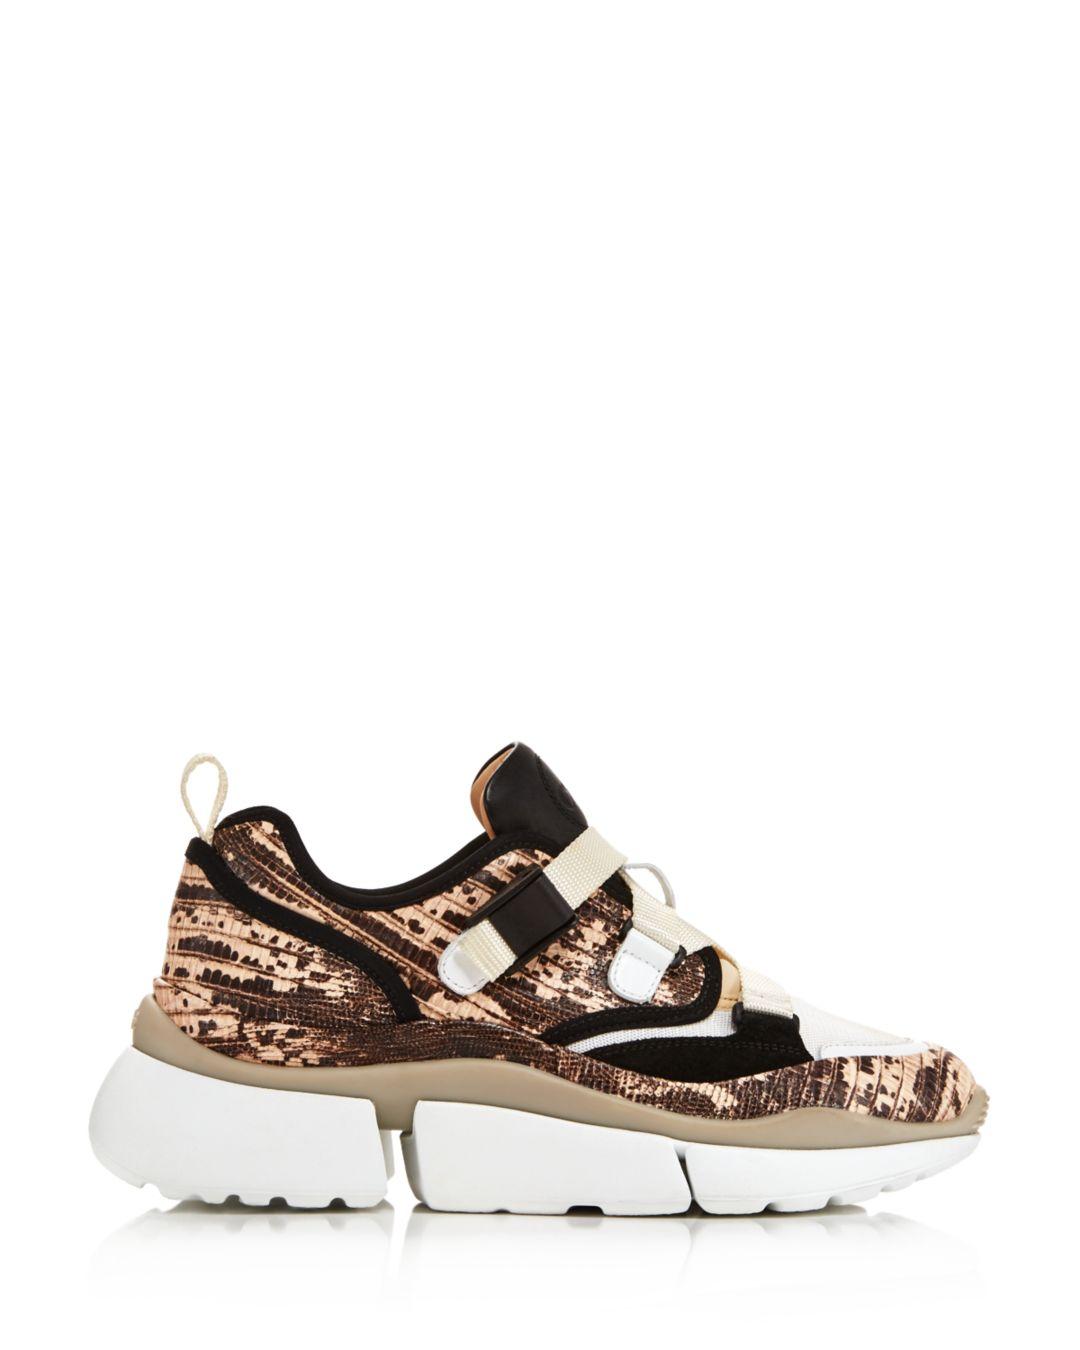 Lyst - Chloé Women's Sonnie Mixed-media Low-top Sneakers